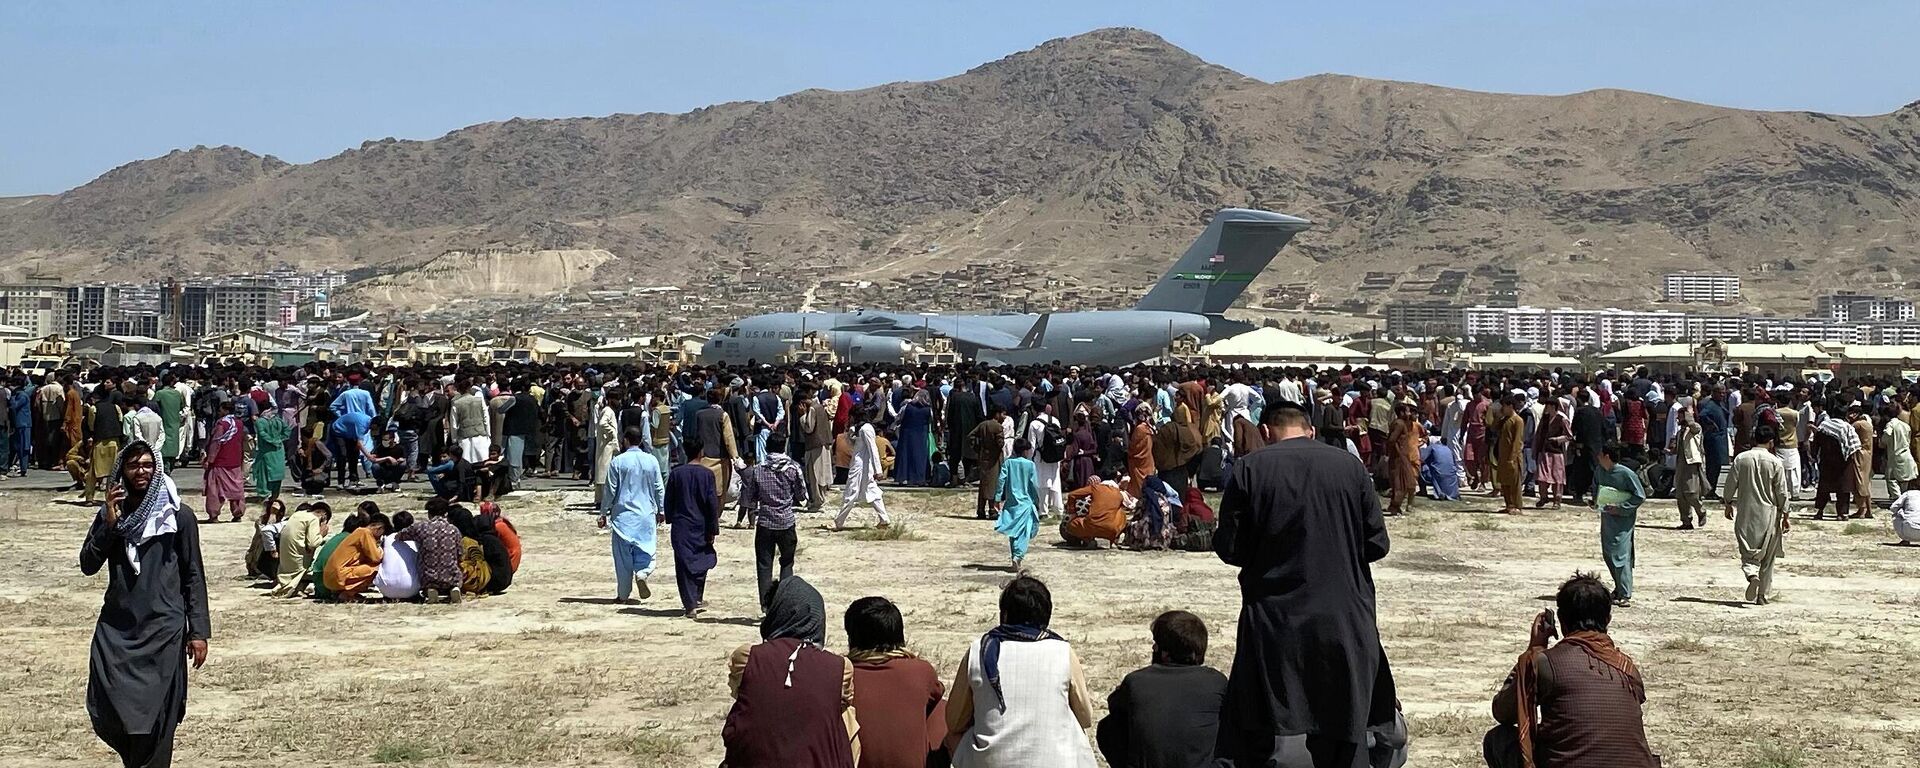  In this Aug. 16, 2021, file photo, hundreds of people gather near a U.S. Air Force C-17 transport plane at the perimeter of the international airport in Kabul, Afghanistan. Ordinary Americans and the nation's airlines are combining to donate miles and cash to help Afghan refugees resettle in the United States. Organizers said Tuesday, Oct. 26, they have raised enough donations pay for 40,000 flights, but they're hoping to nearly double that amount.  - Sputnik International, 1920, 12.08.2022